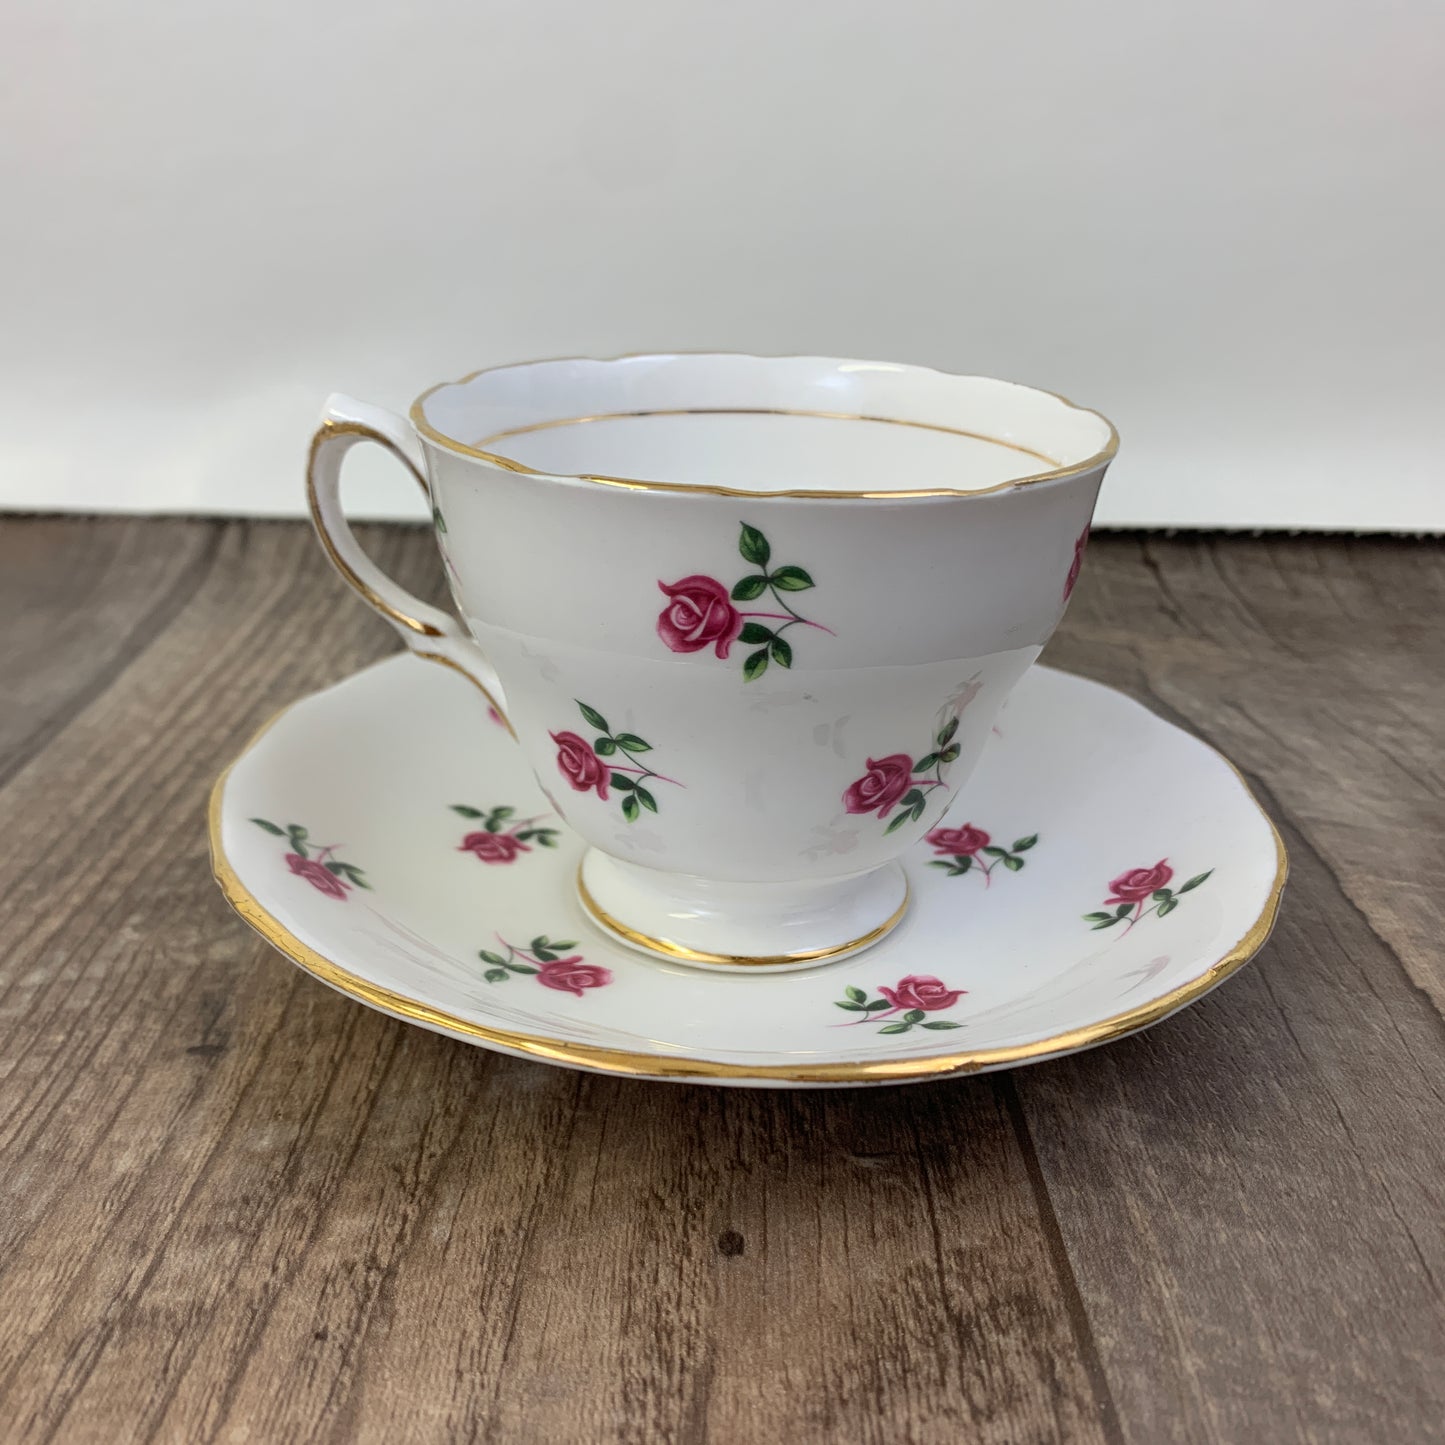 White Teacup with Tiny Pink Roses Vintage Tea Cup and Saucer Set